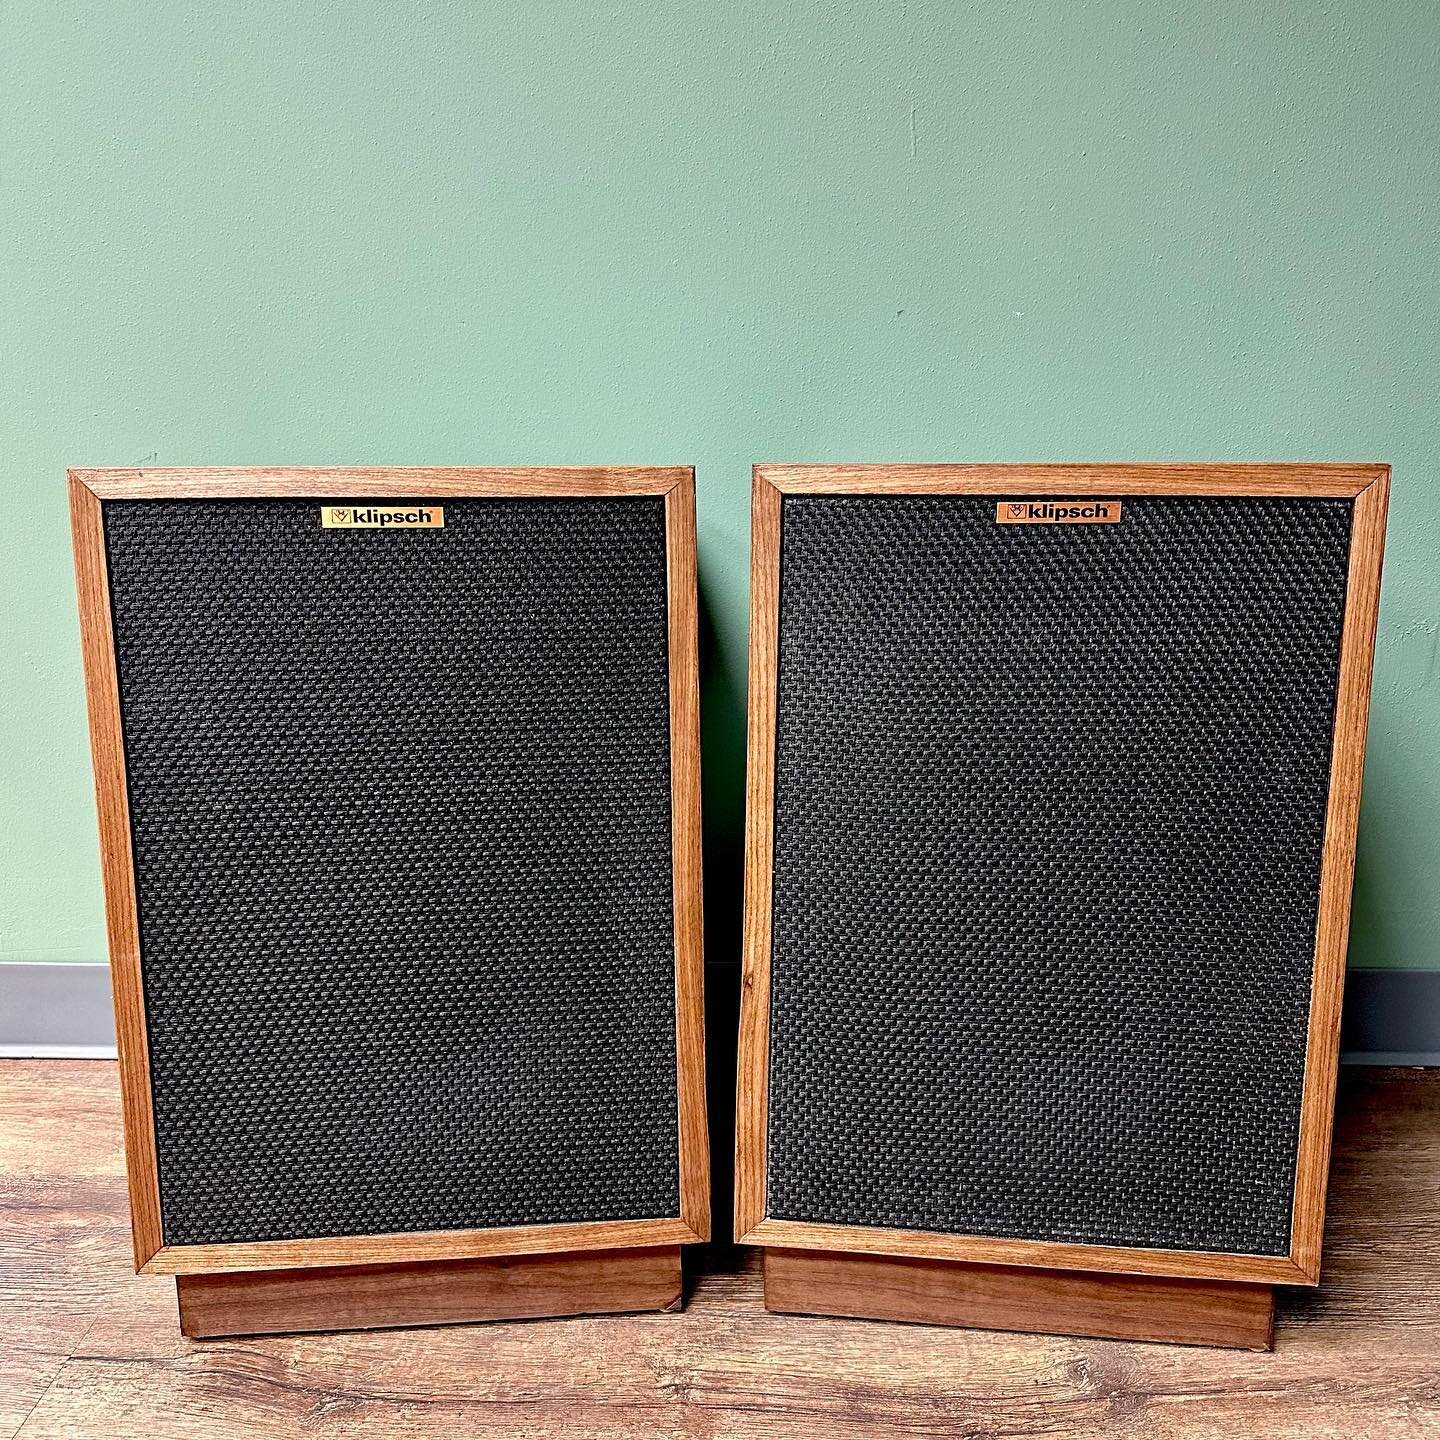 [AVAILABLE] Although there are no &ldquo;perfect&rdquo; speakers, for many hifi enthusiasts the venerable Klipsch Heresy comes mighty close. With its classic 3-way horn loaded construction and 12&rdquo; drivers, they&rsquo;re the perfect match for al